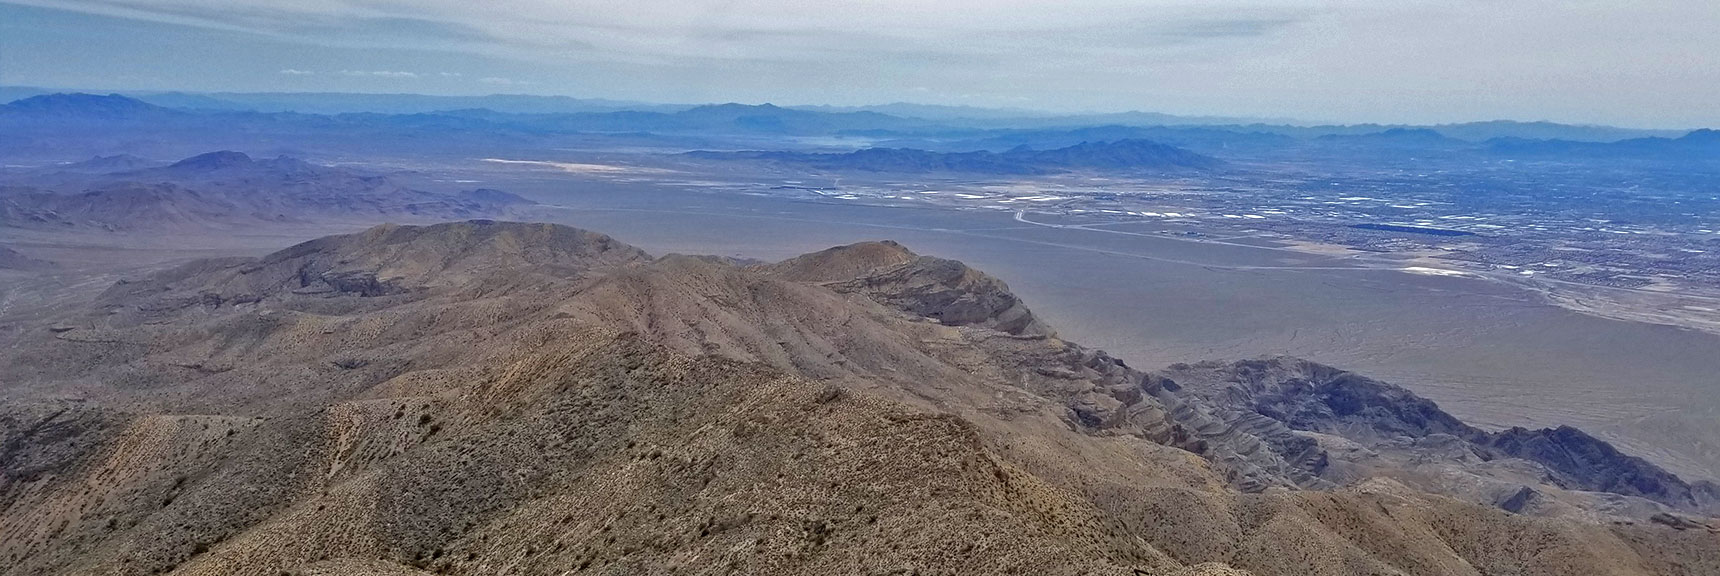 View Southeast from Gass Peak Eastern Summit | Gass Peak Eastern Summit Ultra-marathon Adventure, Nevada